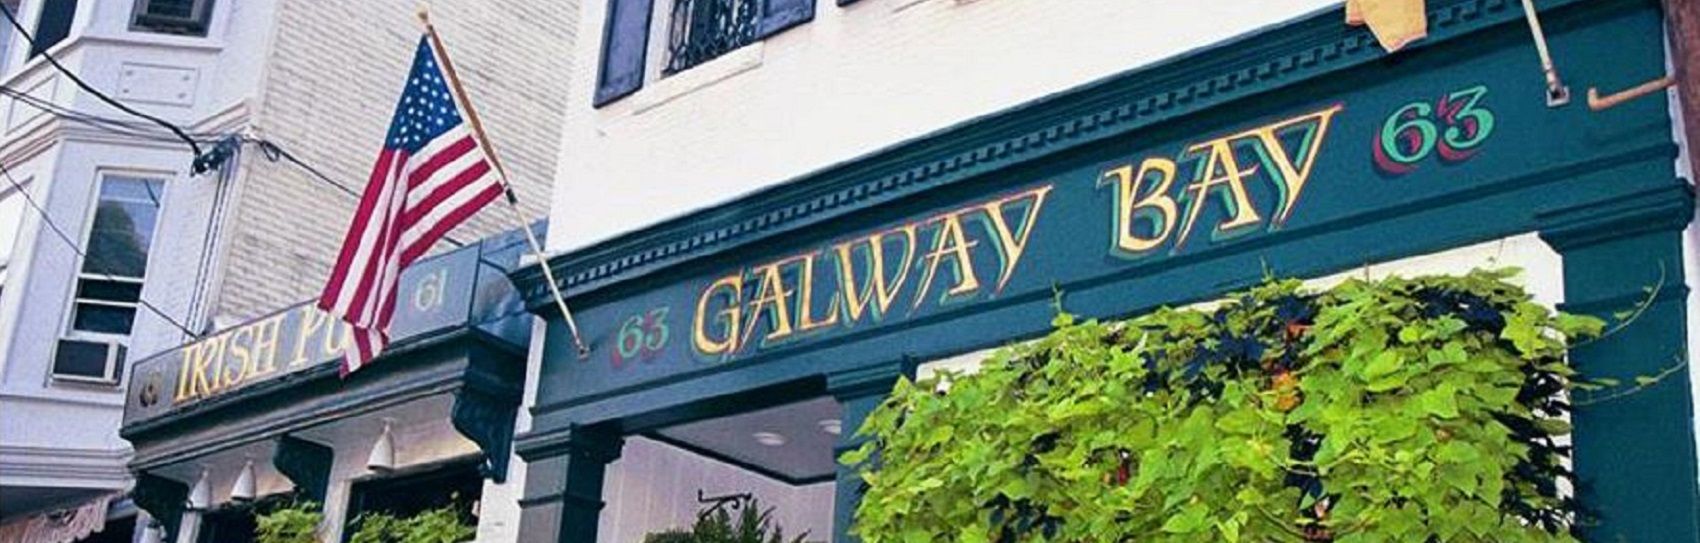 Galway-front